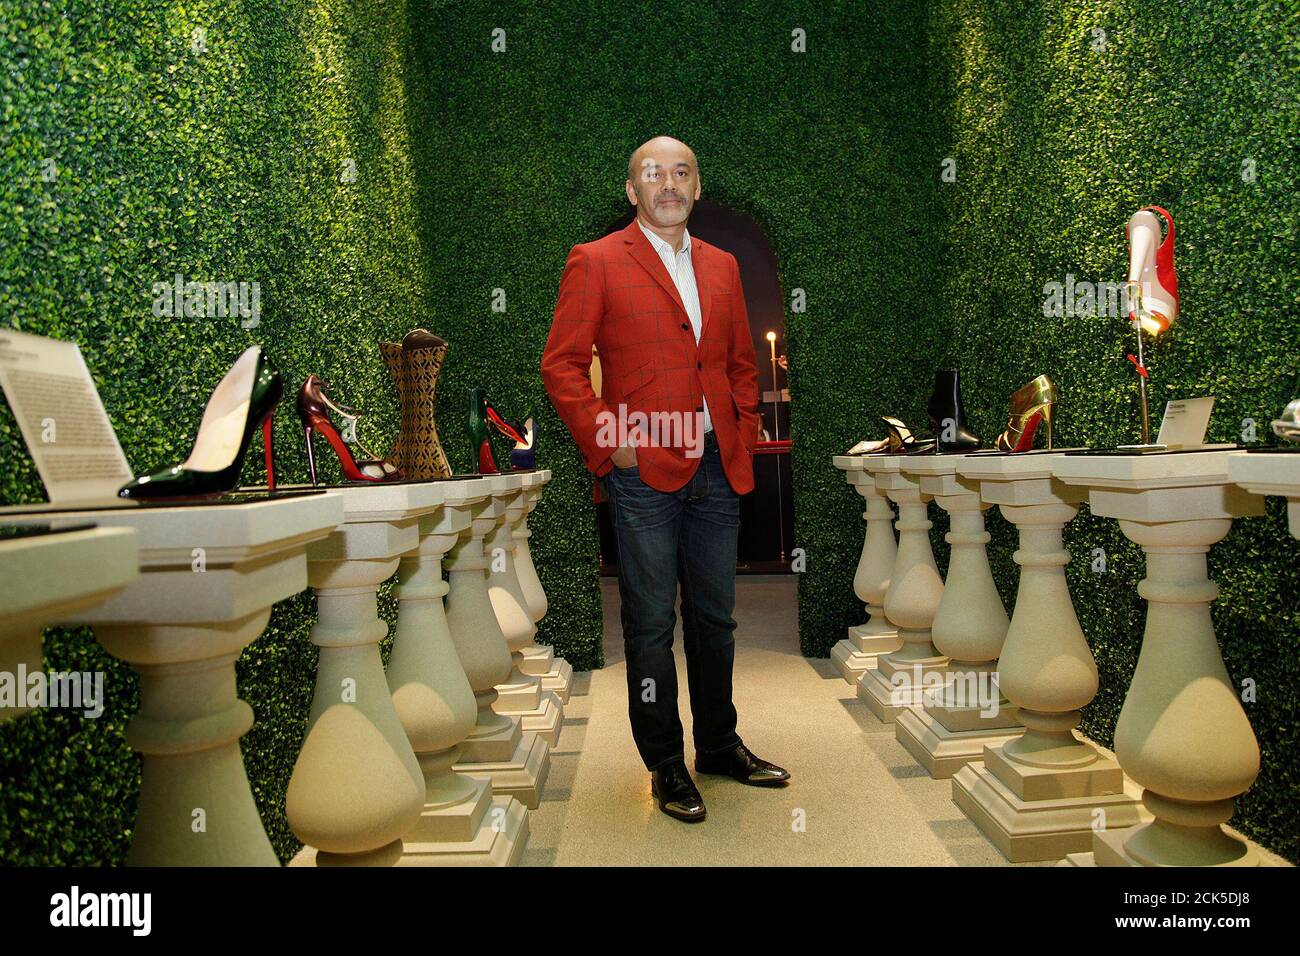 French shoe designer Louboutin poses for photographs a media viewing of his retrospective exhibition the Design Museum in London April 30, 2012. The exhibition will run from May 1